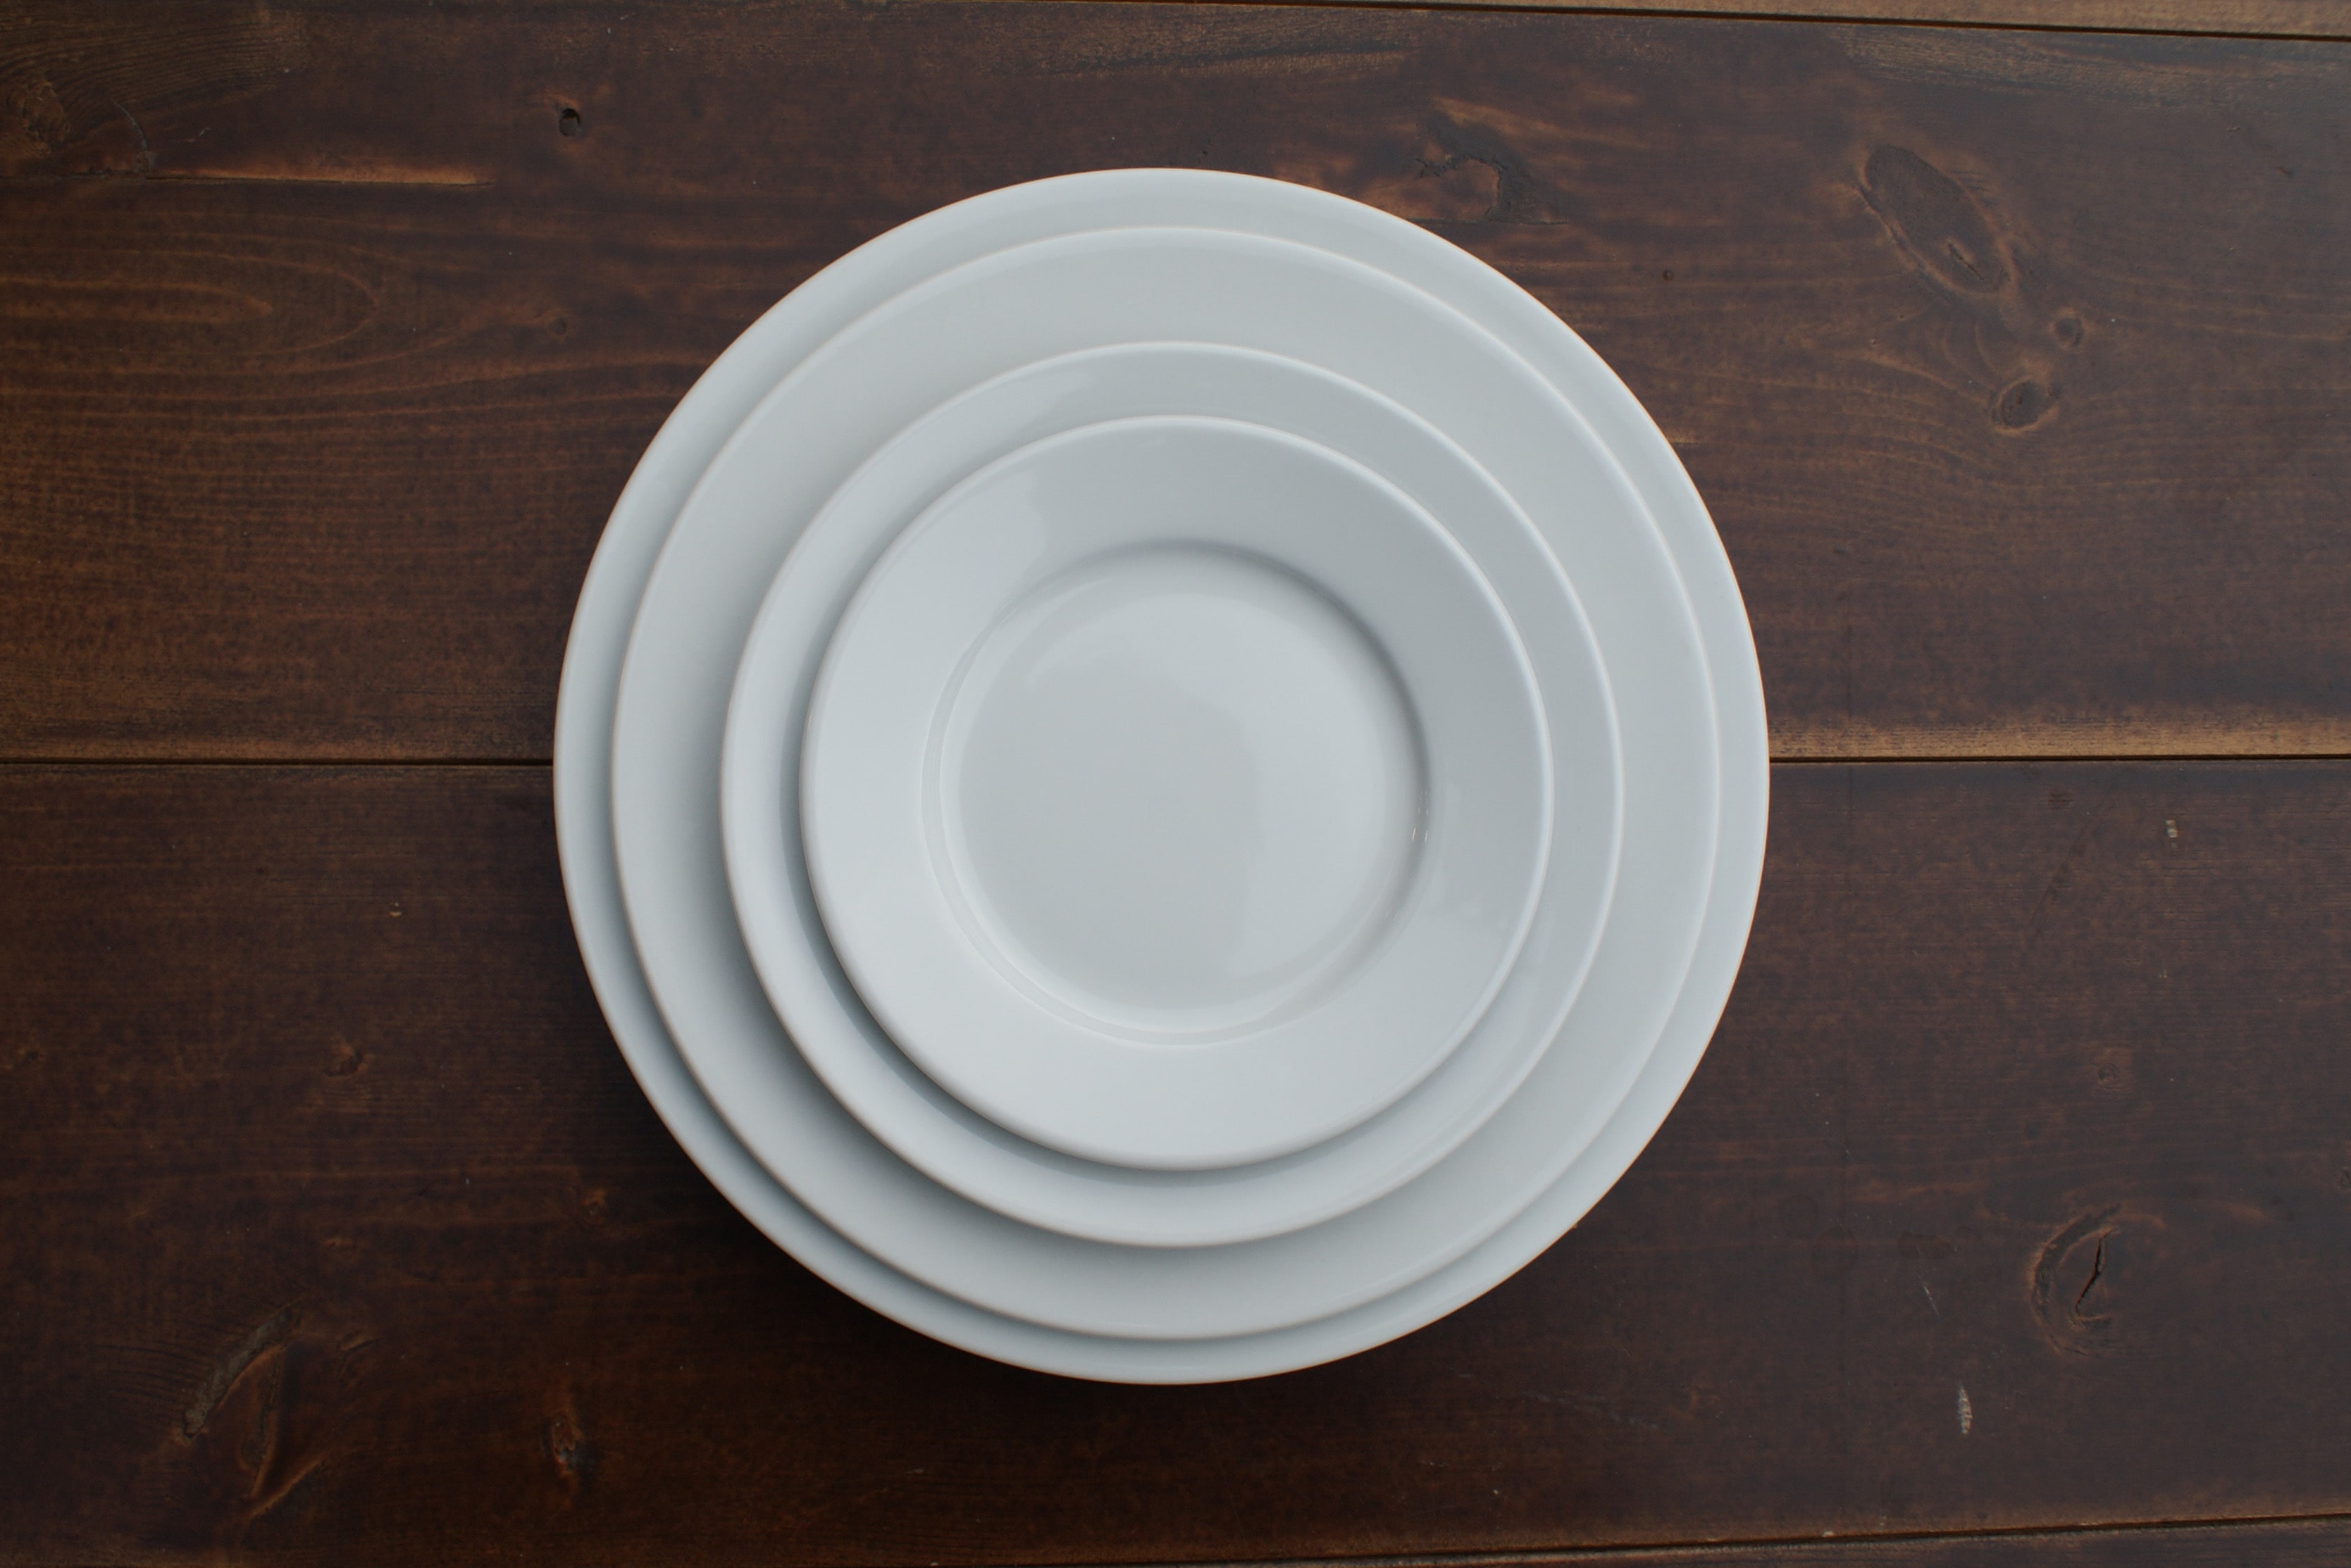 circular white plates stacked on a wood table